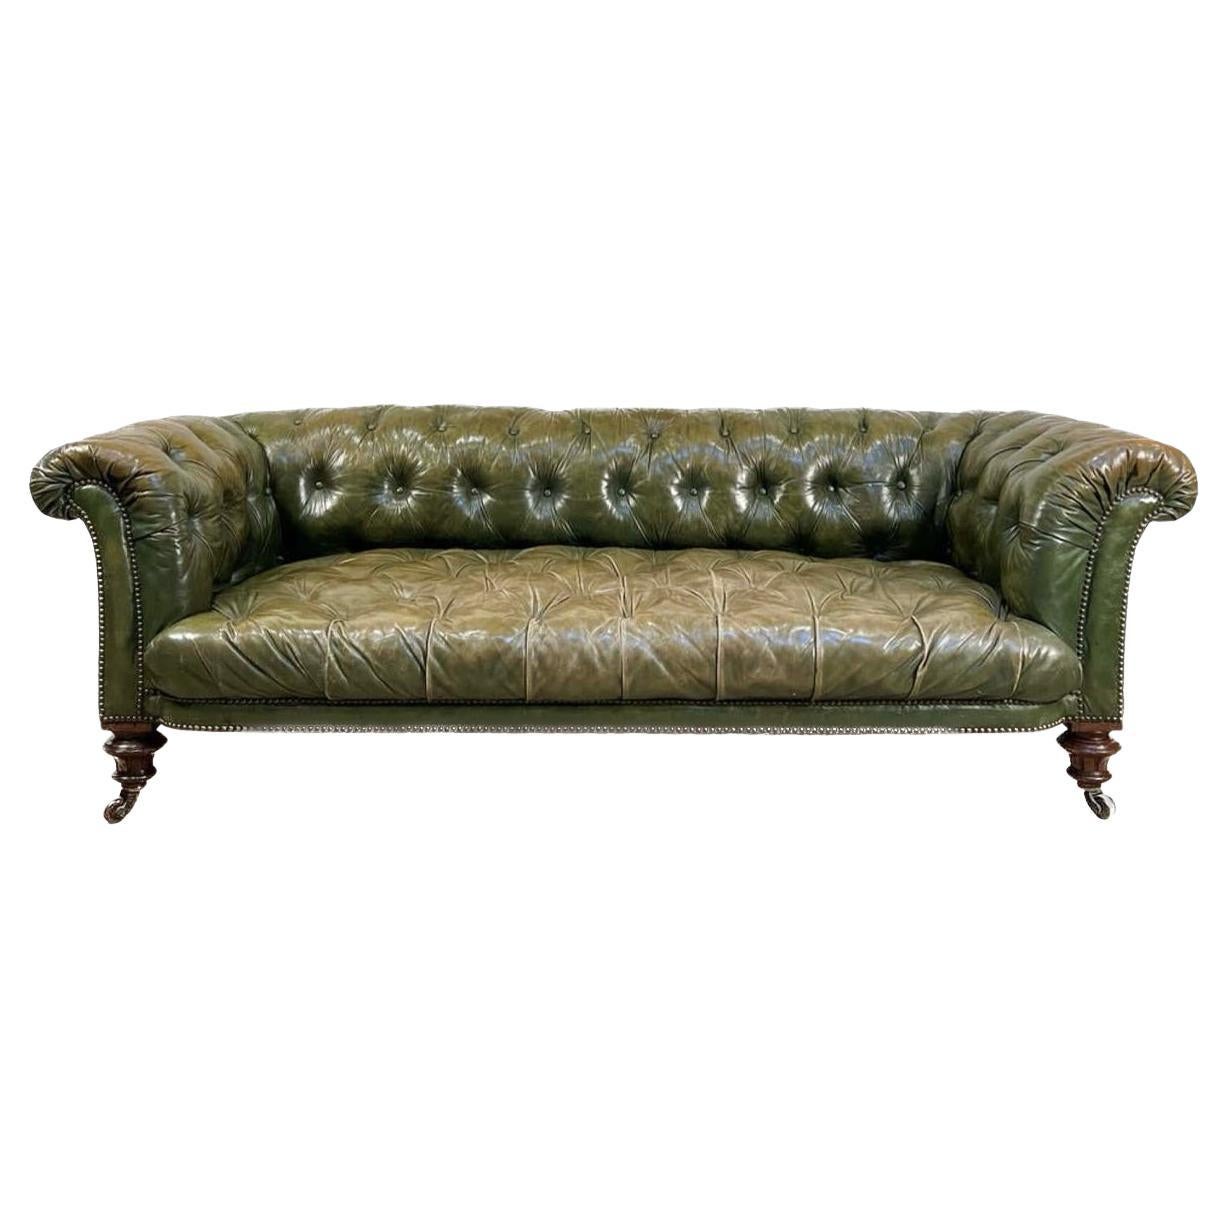 Early 19thC William IV Chesterfield Sofa in Beautiful Green Leathers